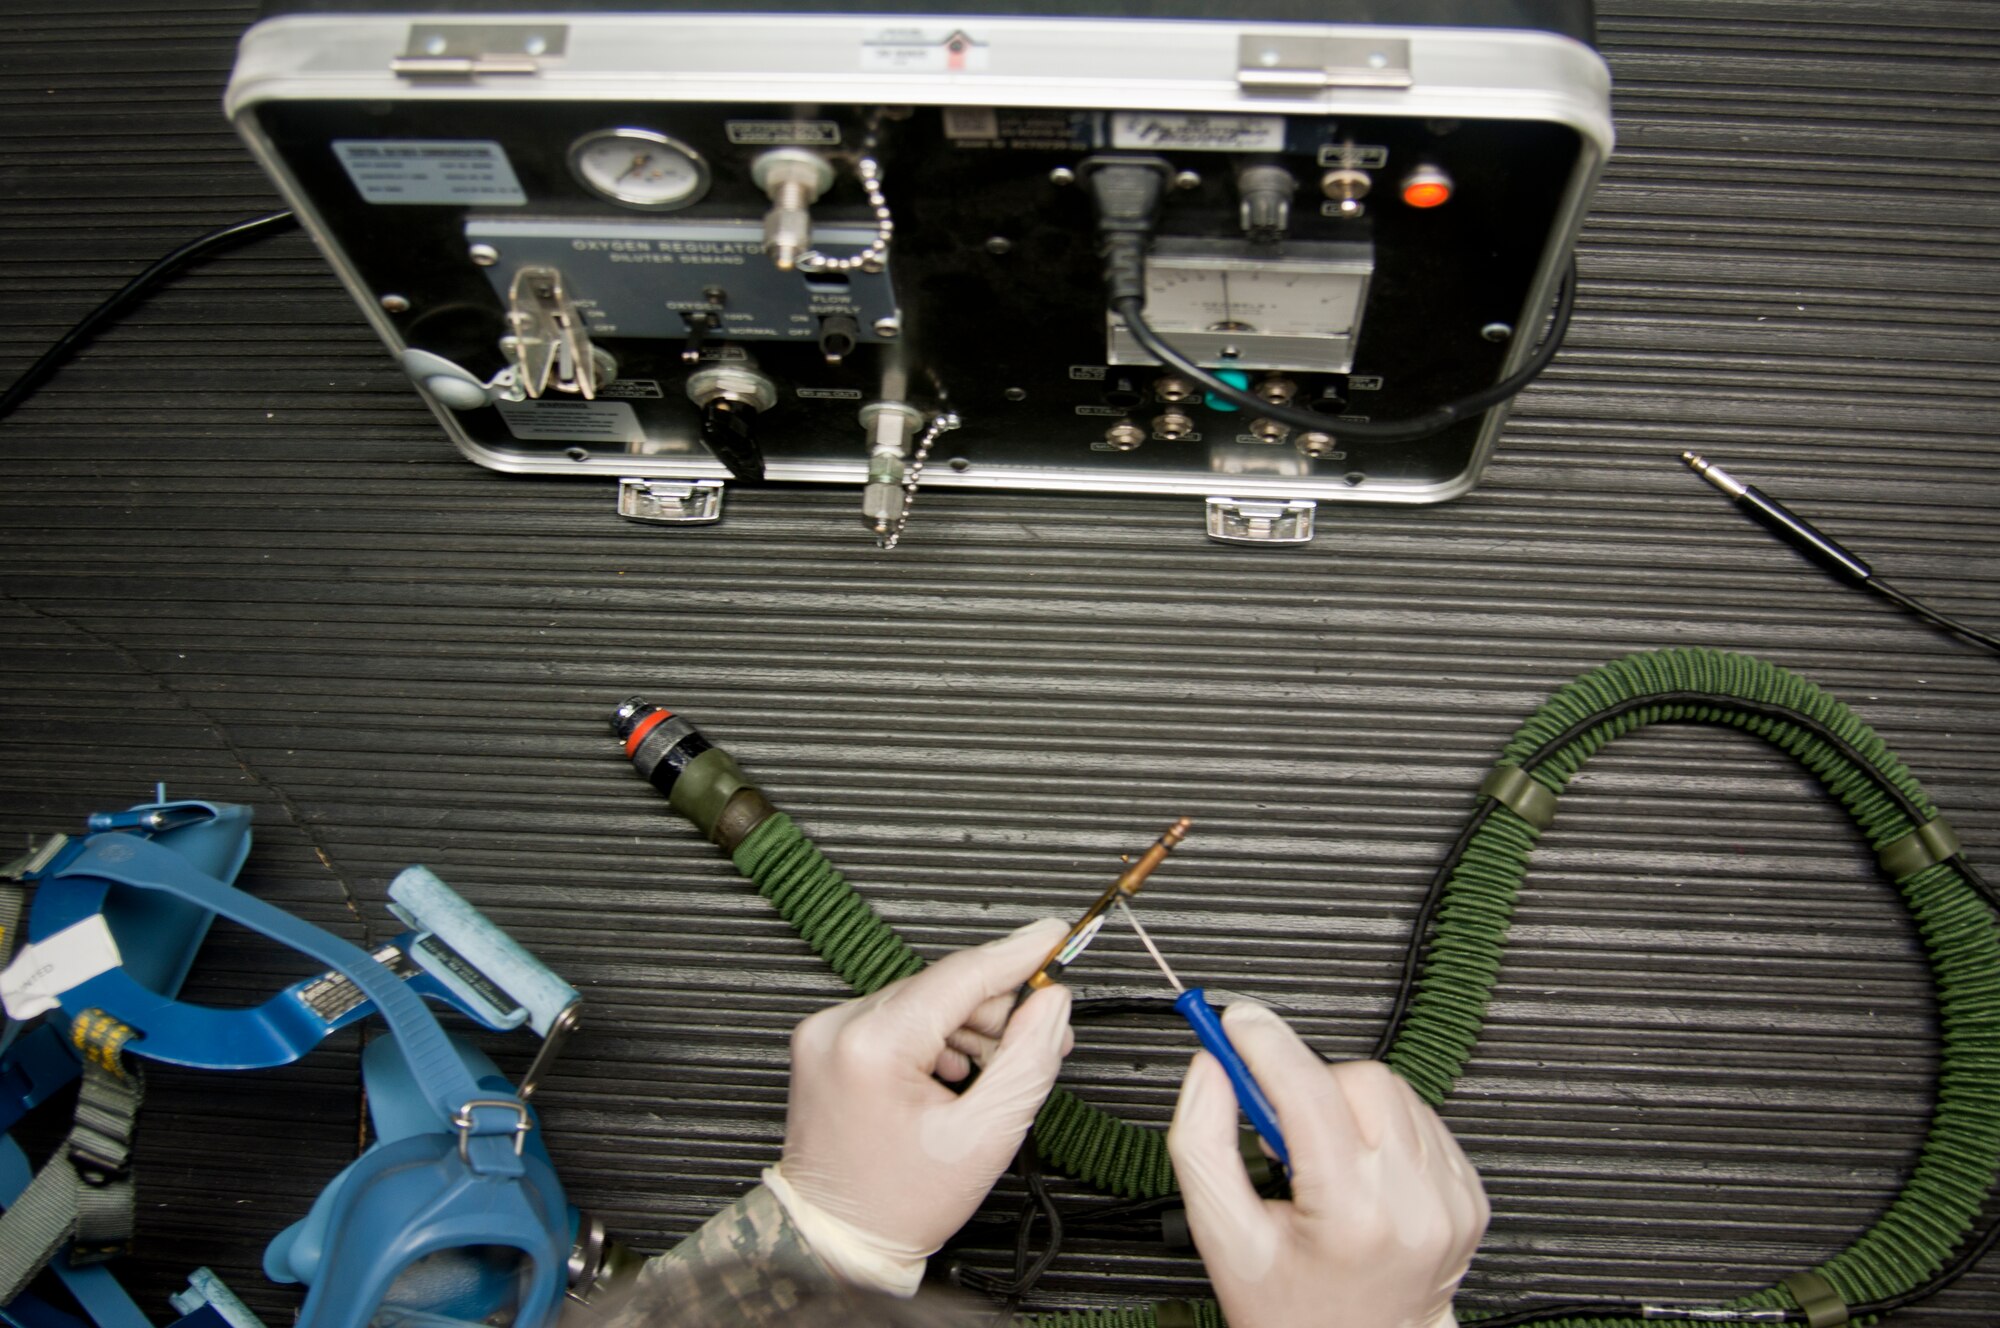 Senior Airman Abraham Sanchez demonstrates the process of repairing a KC-10 Extender quick-don mask July 24, 2014, at Travis Air Force Base, Calif. Sanchez is a 60th Operations Support Squadron aircrew flight equipment technician. (U.S. Air Force photo/Staff Sgt. John Ayre)